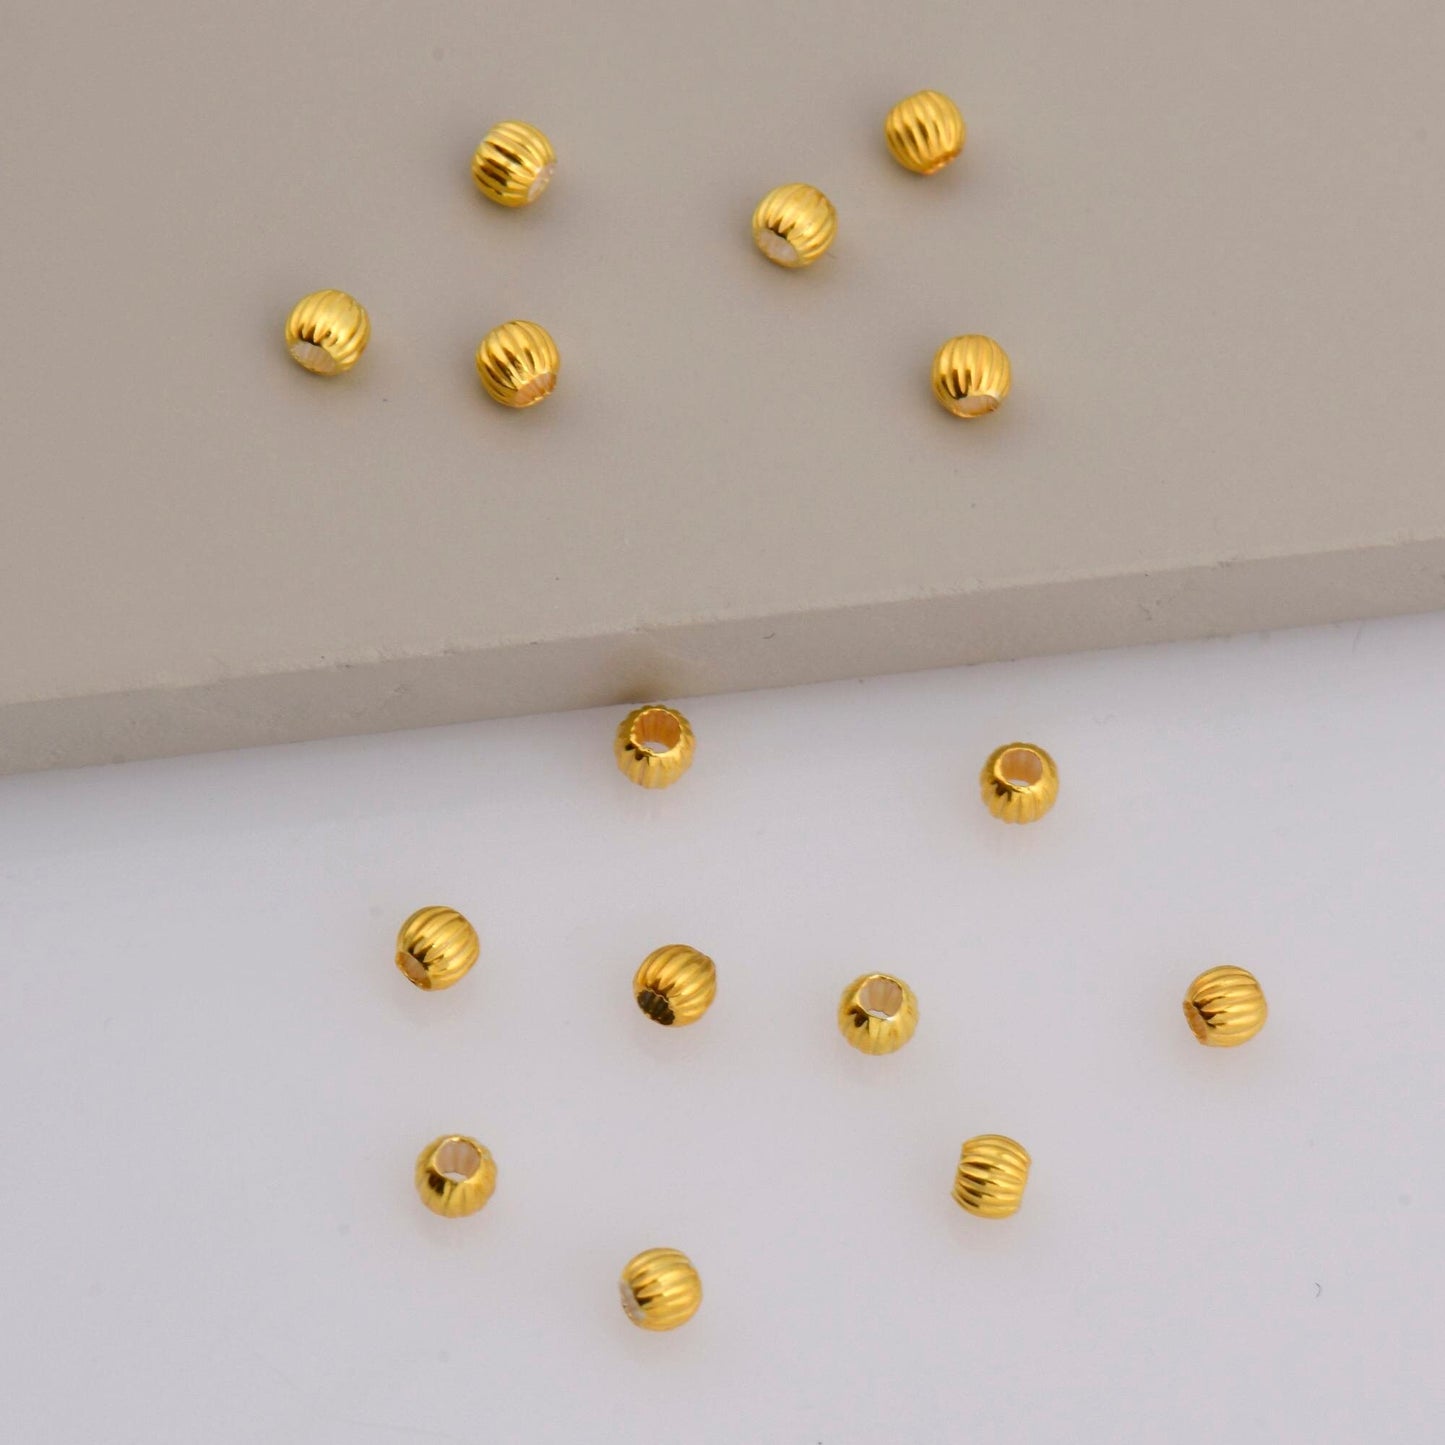 Silver Corrugated Round Beads in 24K Gold Vermeil, 24K Gold Plated Seamless Round Beads, Round Seperator Beads, Jewelry Supplies, M/VM5 A-F